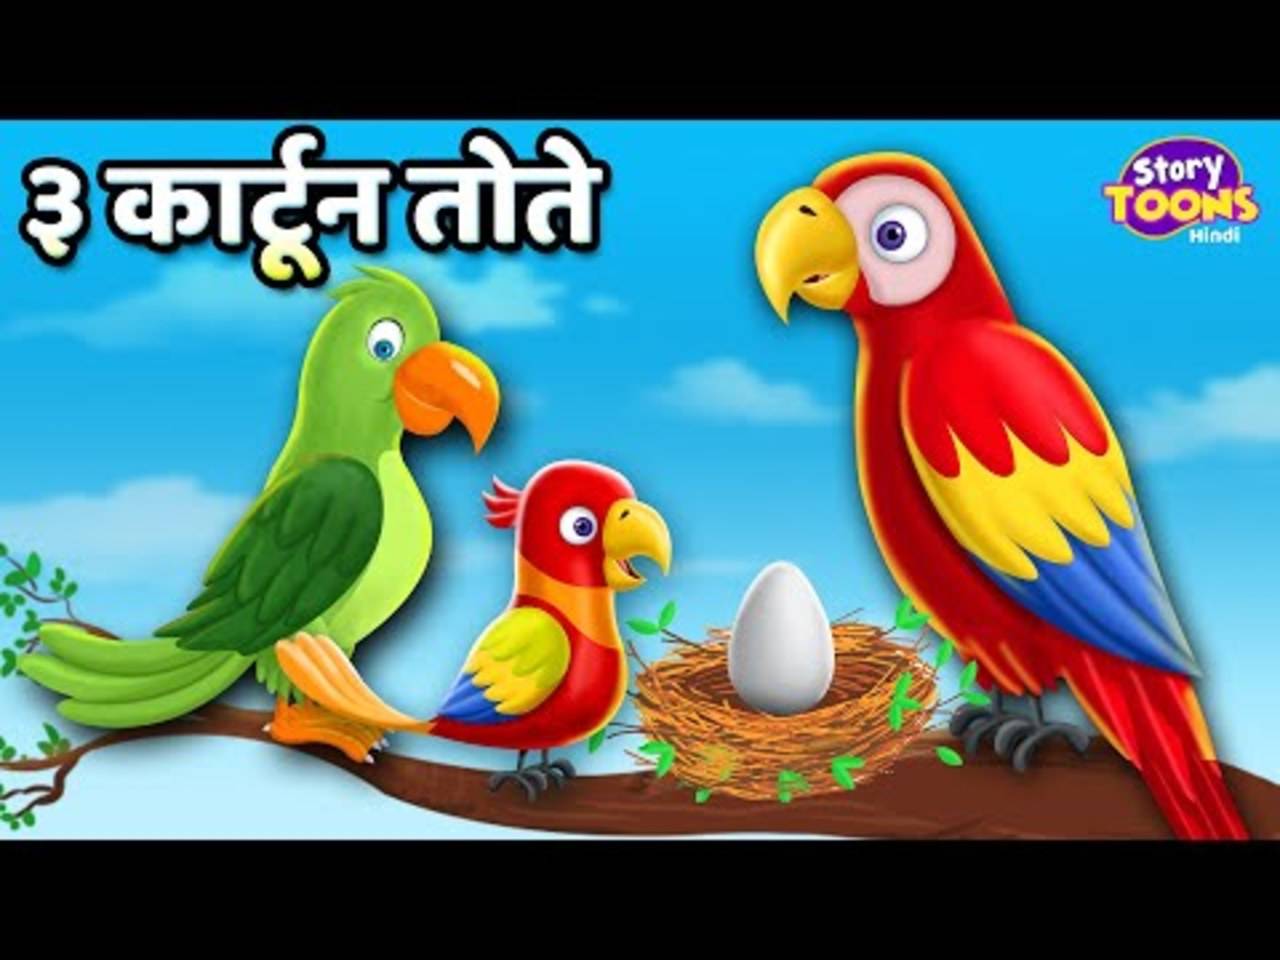 Watch Popular Children Hindi Nursery Story 'Cartoon Parrot Story' for Kids  - Check out Fun Kids Nursery Rhymes And Baby Songs In Hindi | Entertainment  - Times of India Videos